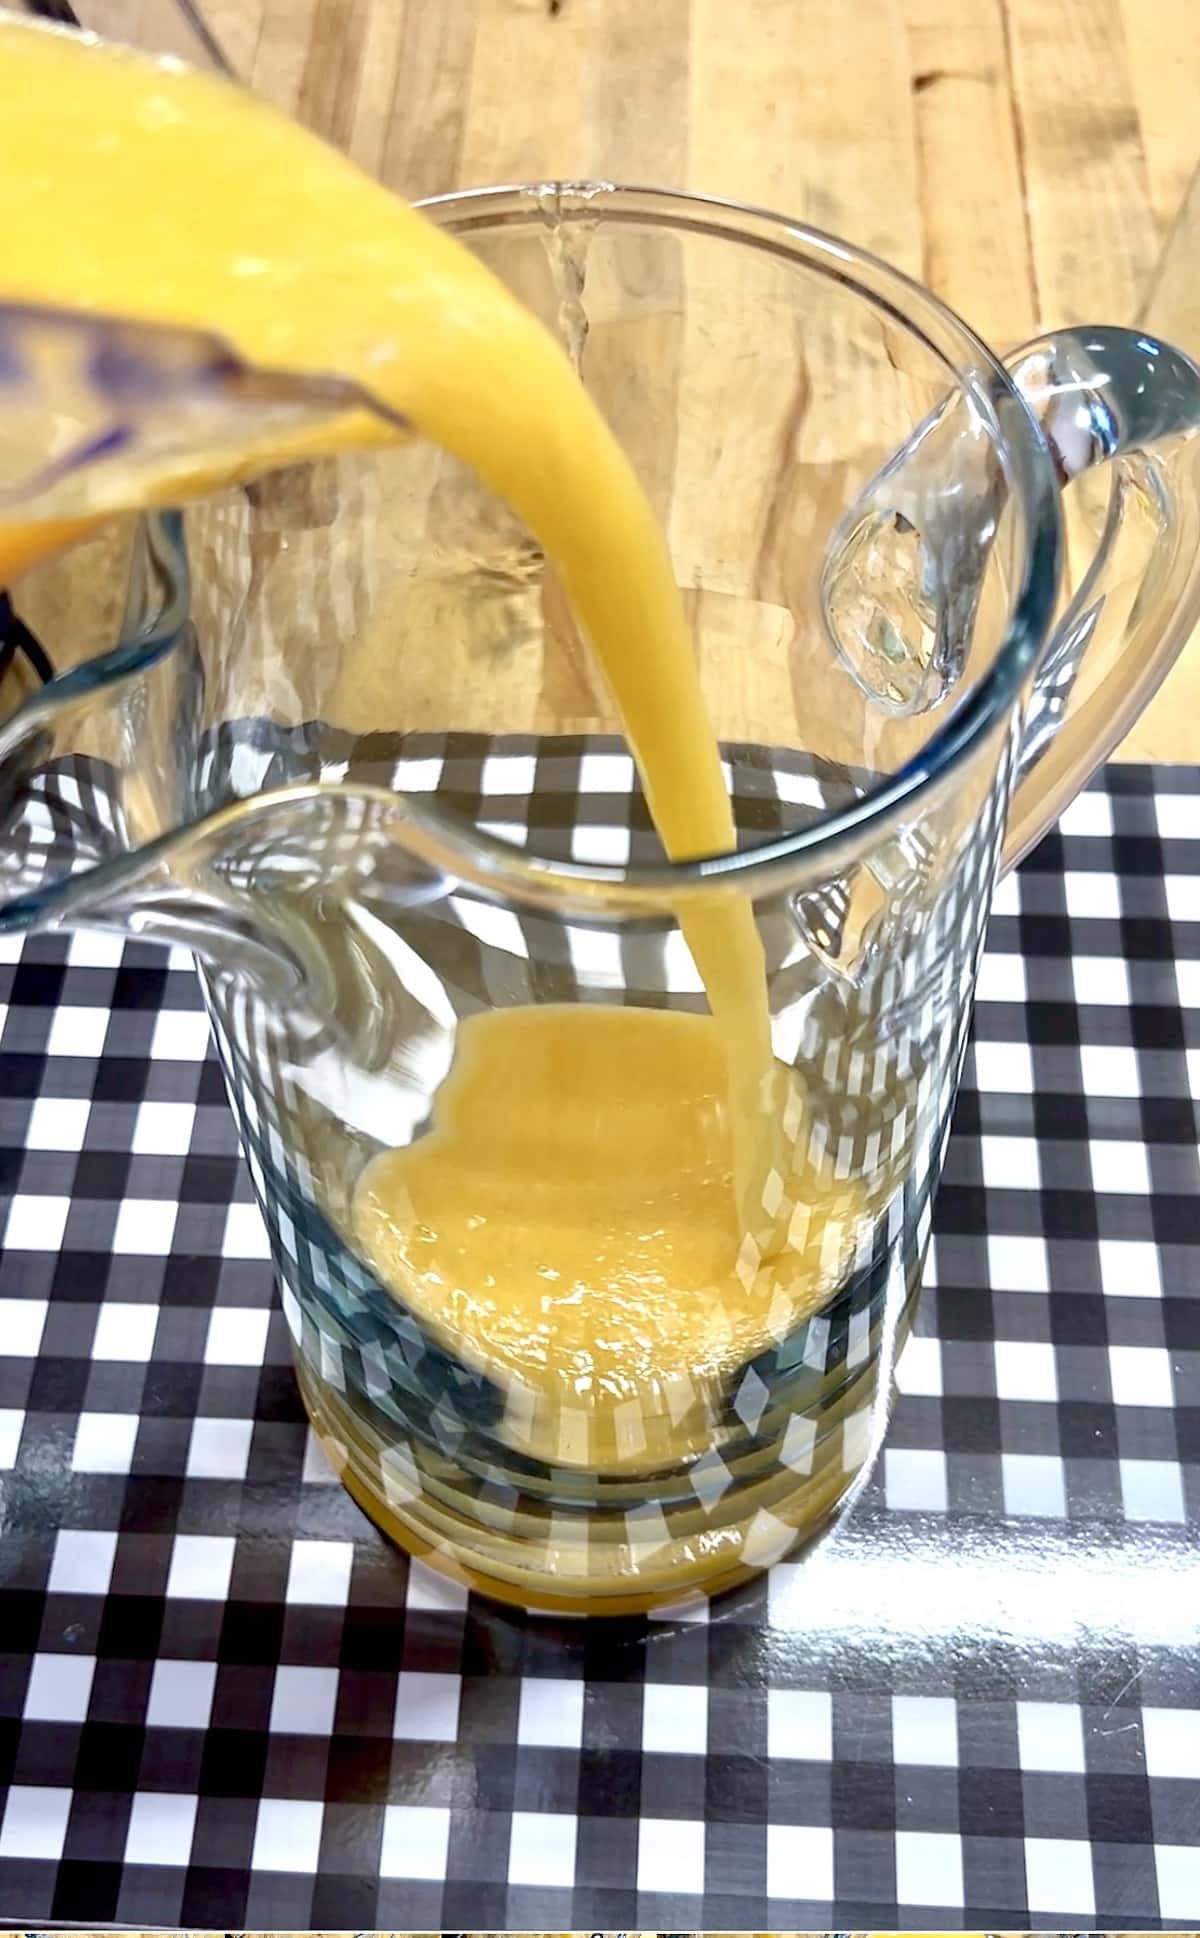 Pouring peach and wine mixture into a pitcher.